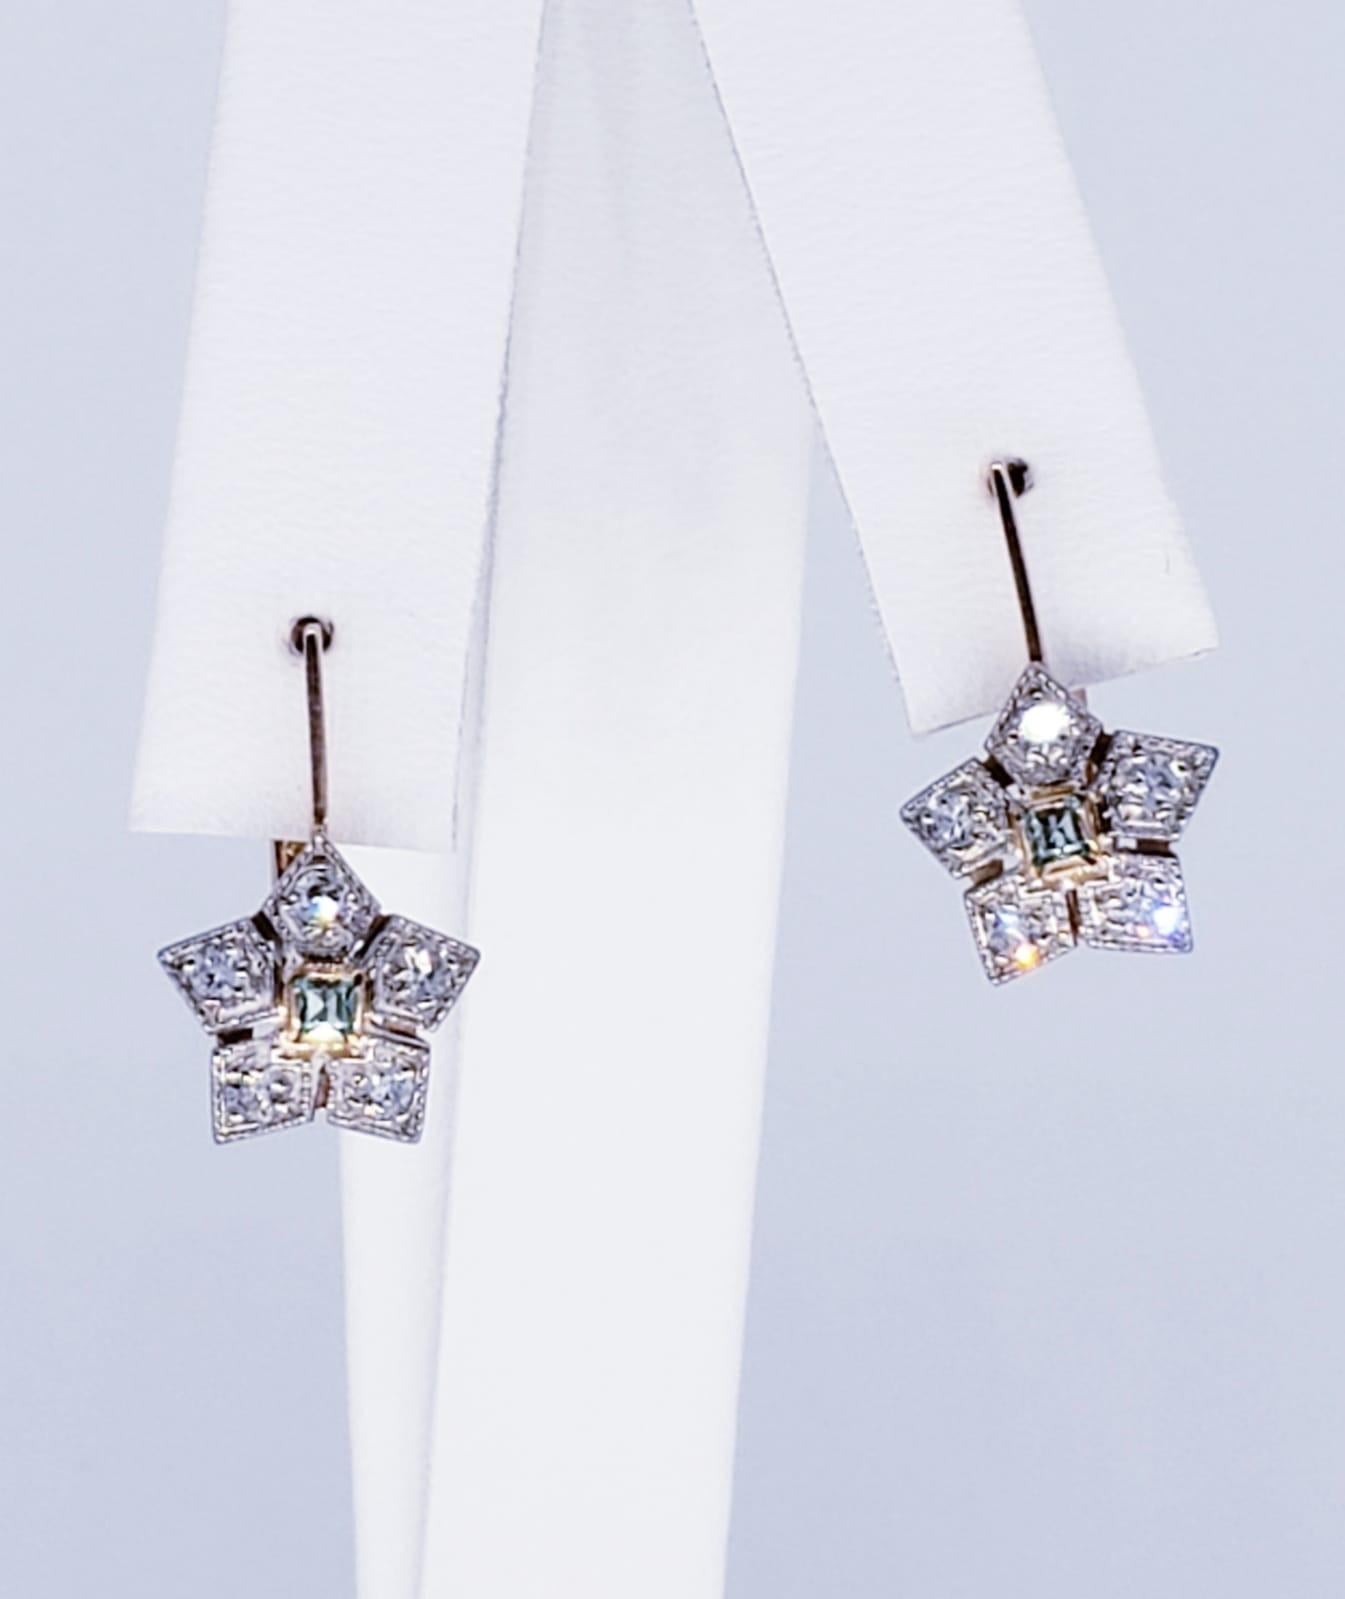 Art Deco Style Russian 0.40 Carat Diamond & Emerald Flower Earrings. The earrings have hallmarks & Assay 583 for purity 14k rose gold. The diamonds are VS clarity and weight approx total 0.30 carat (10 diamonds X 0.03ct). The earrings measure